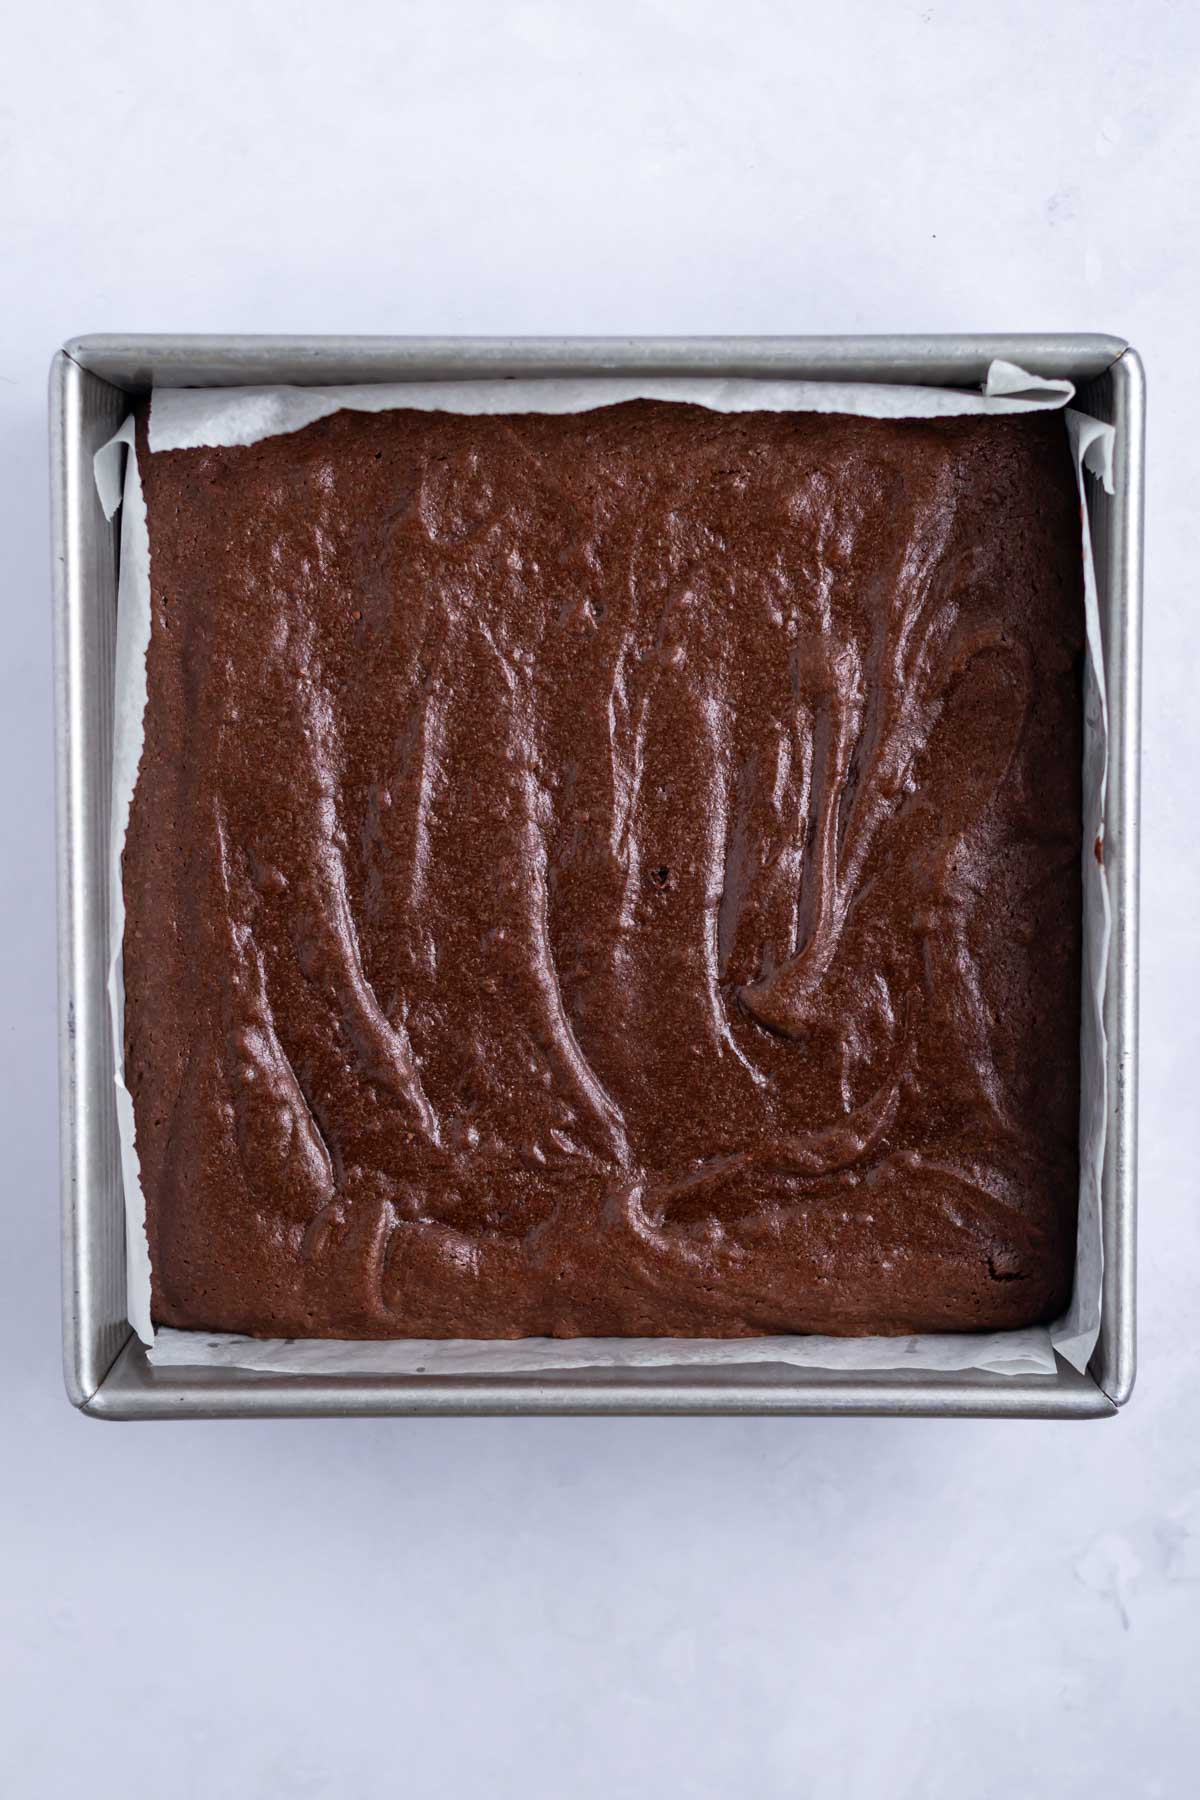 baked brownies in a parchment lined pan